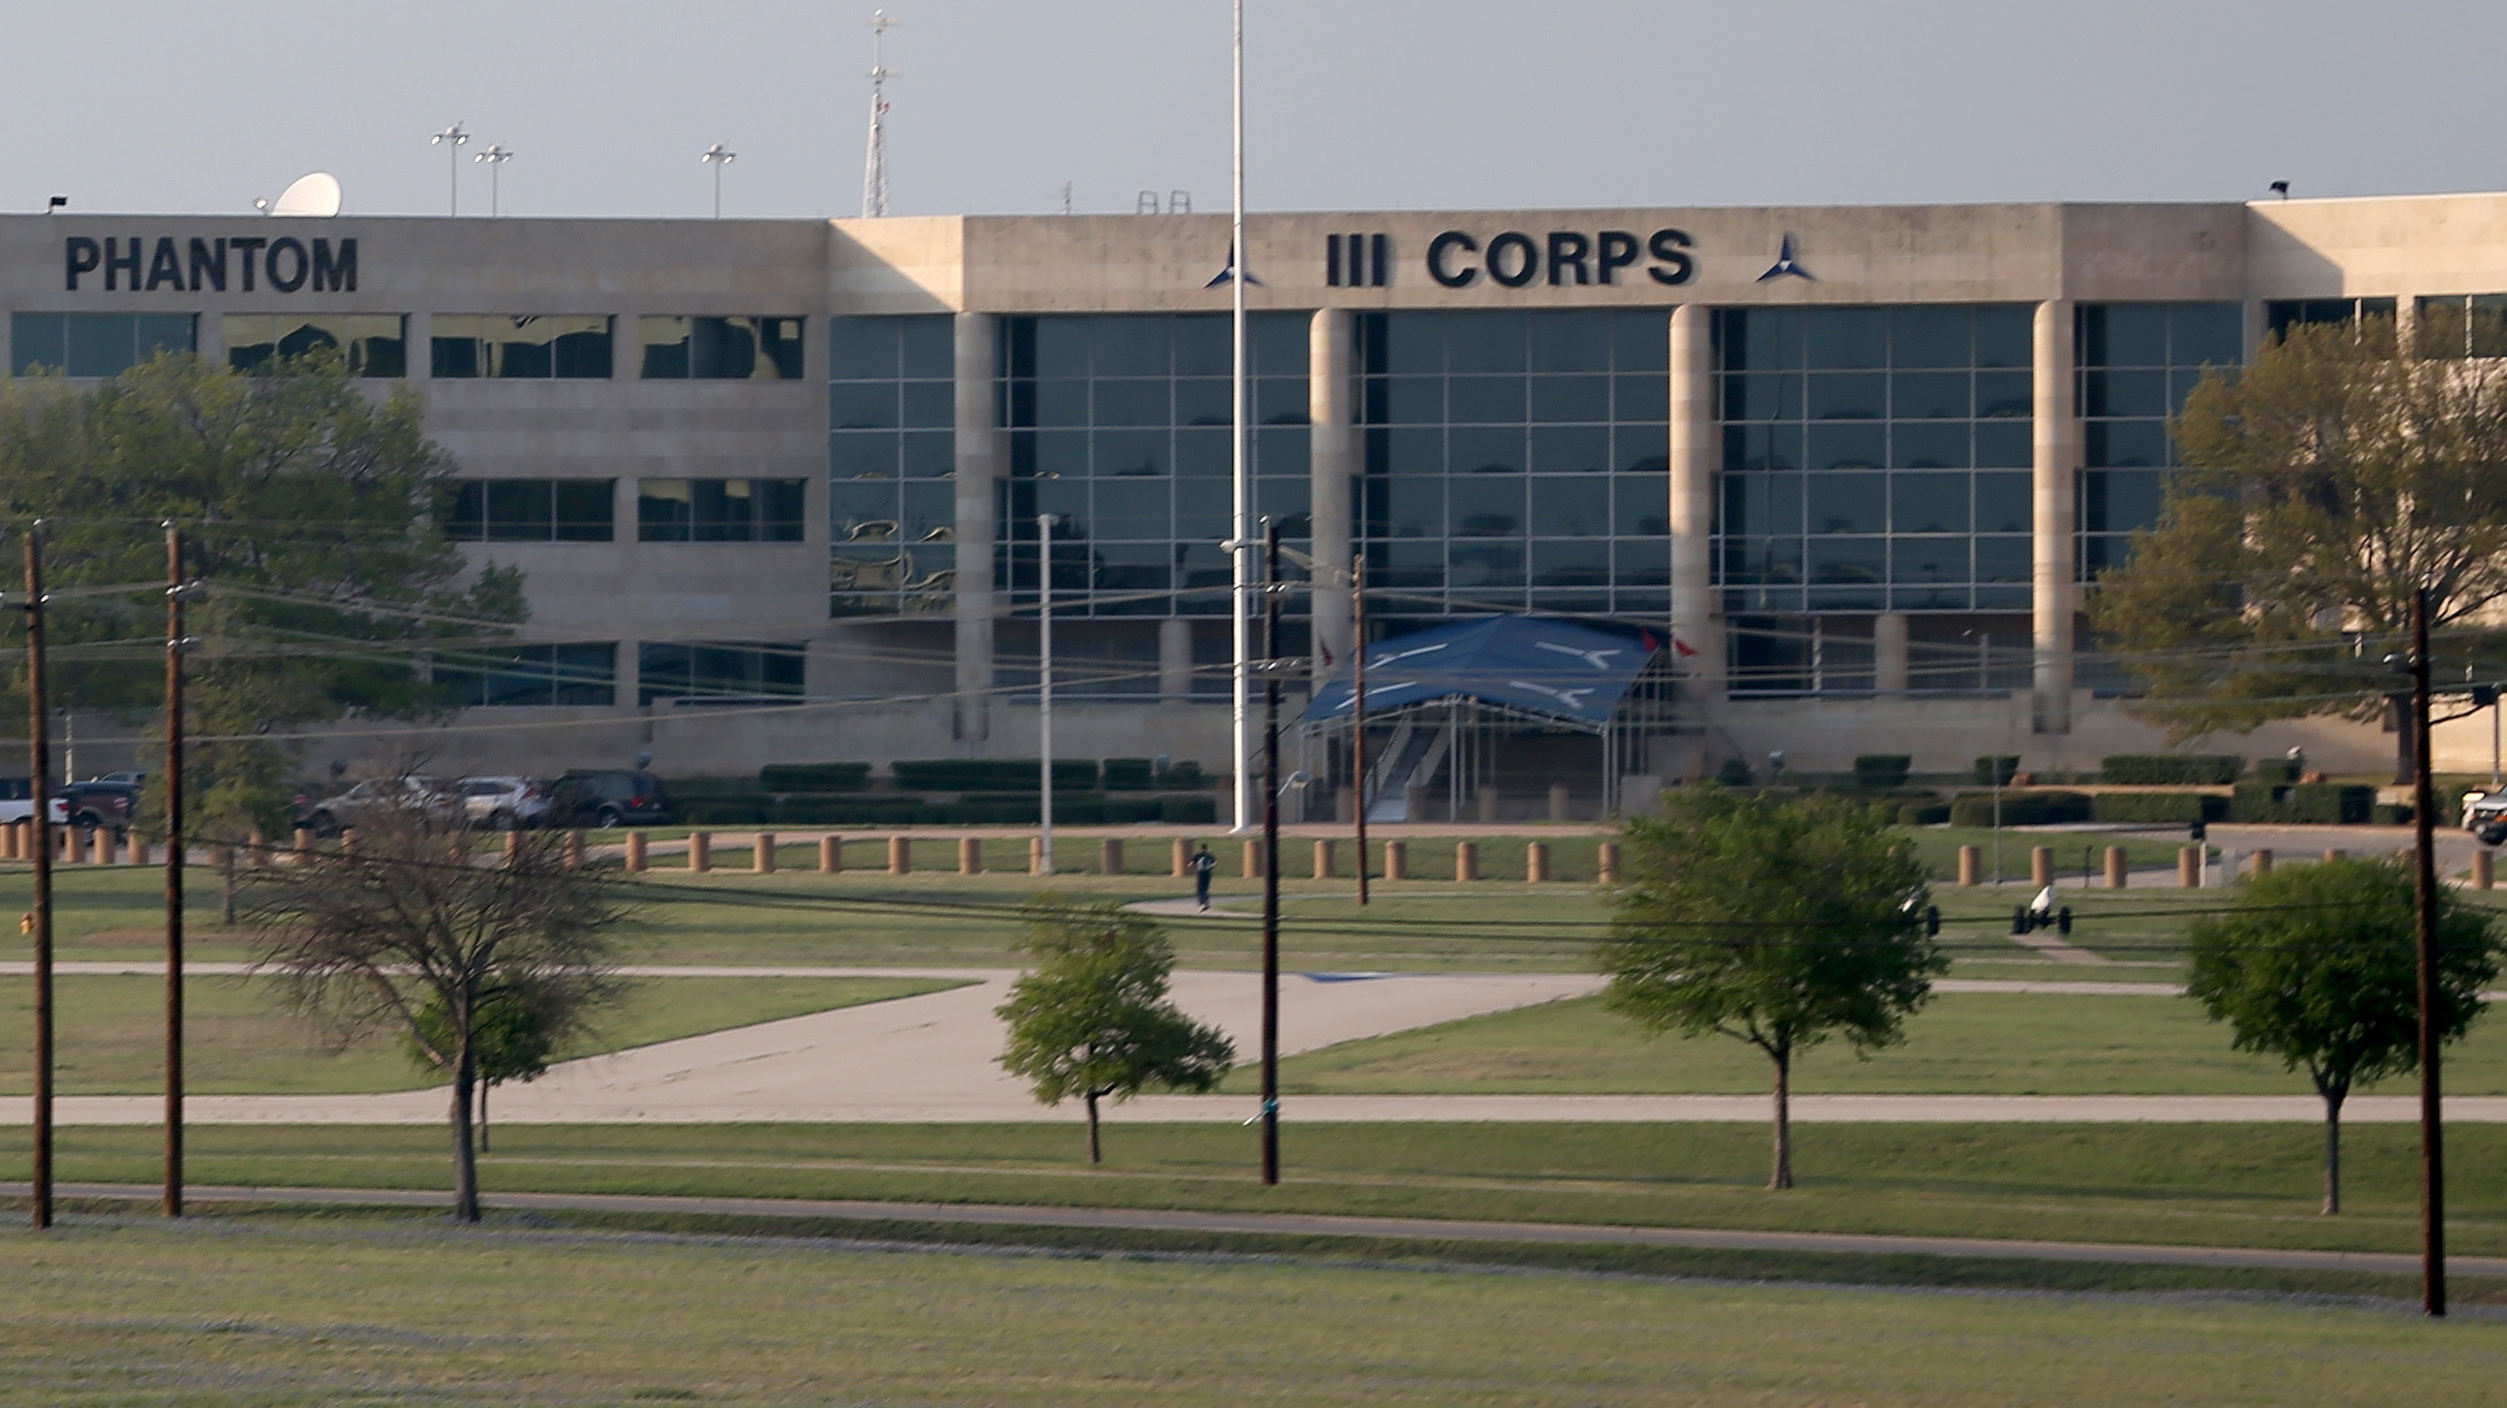 A building on Fort Hood Army Base in Fort Hood, Texas, is seen in this 2014 photo. Rescue crews were searching for four soldiers missing after a training accident on Thursday